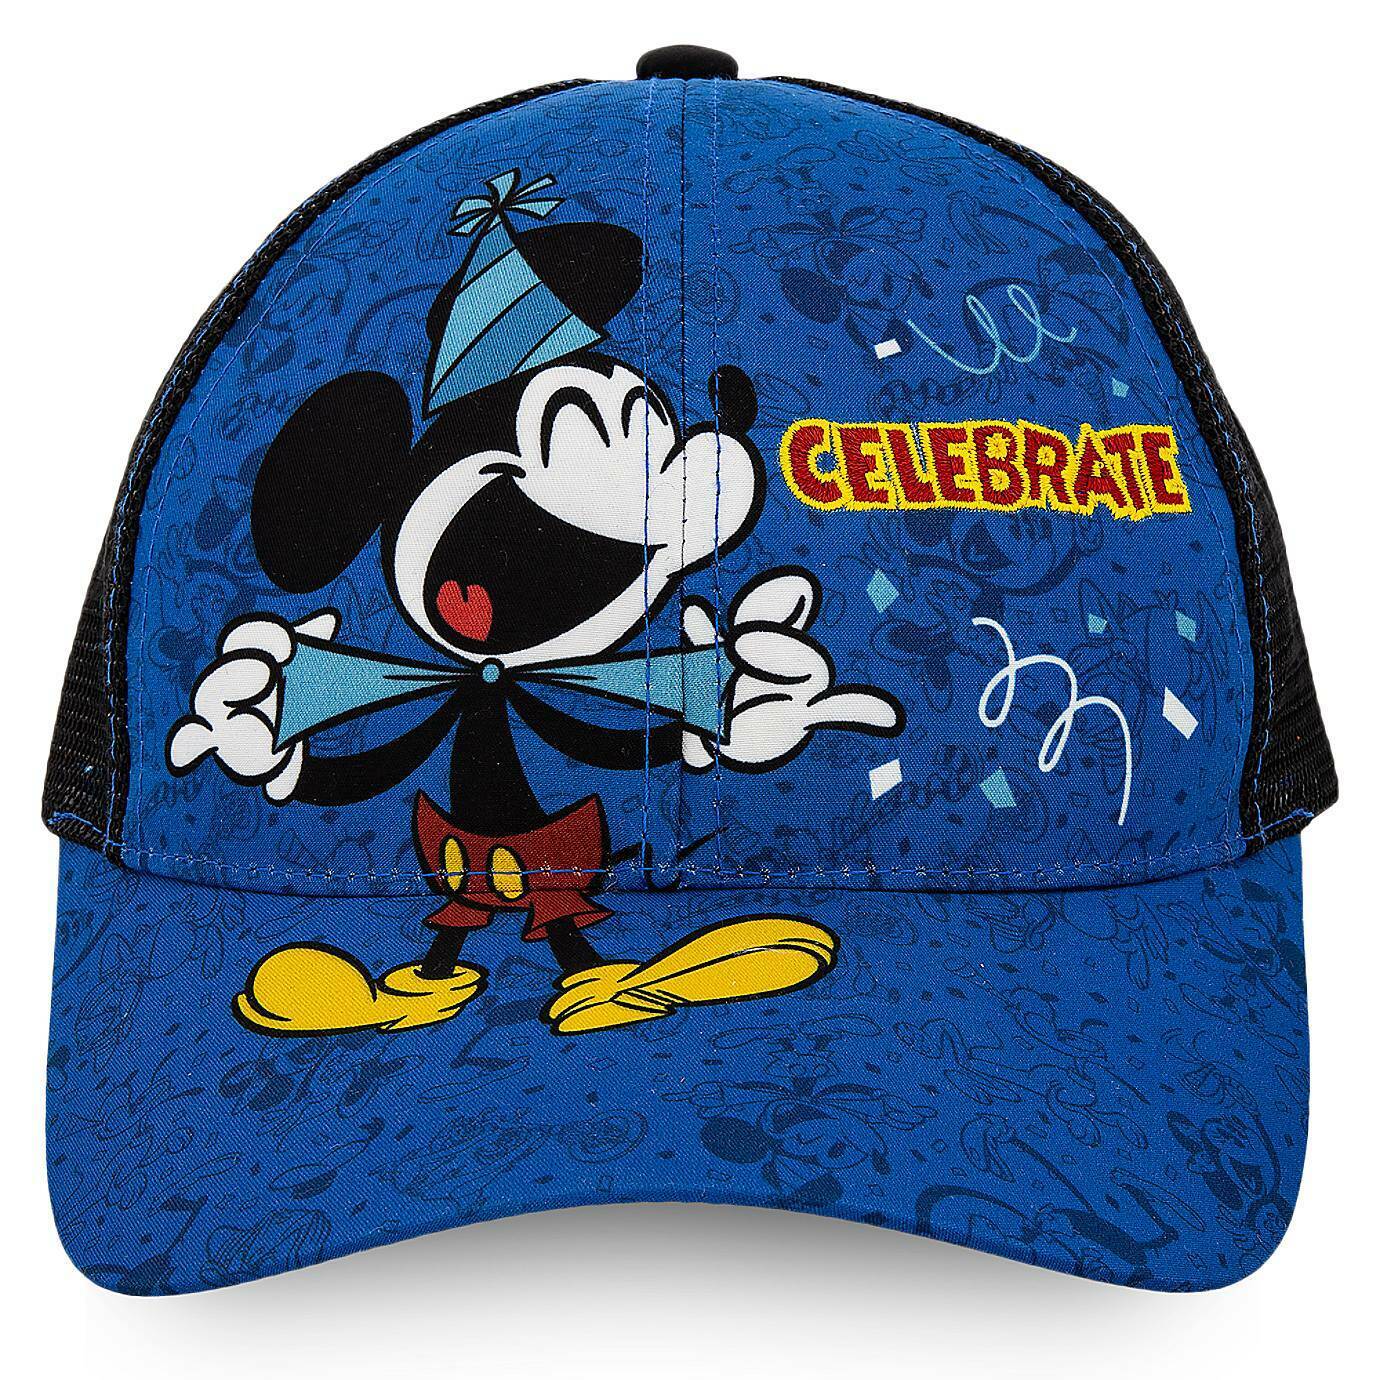 Disney Parks 2019 Mickey 90th Celebrate Baseball Cap for Kids New with Tags